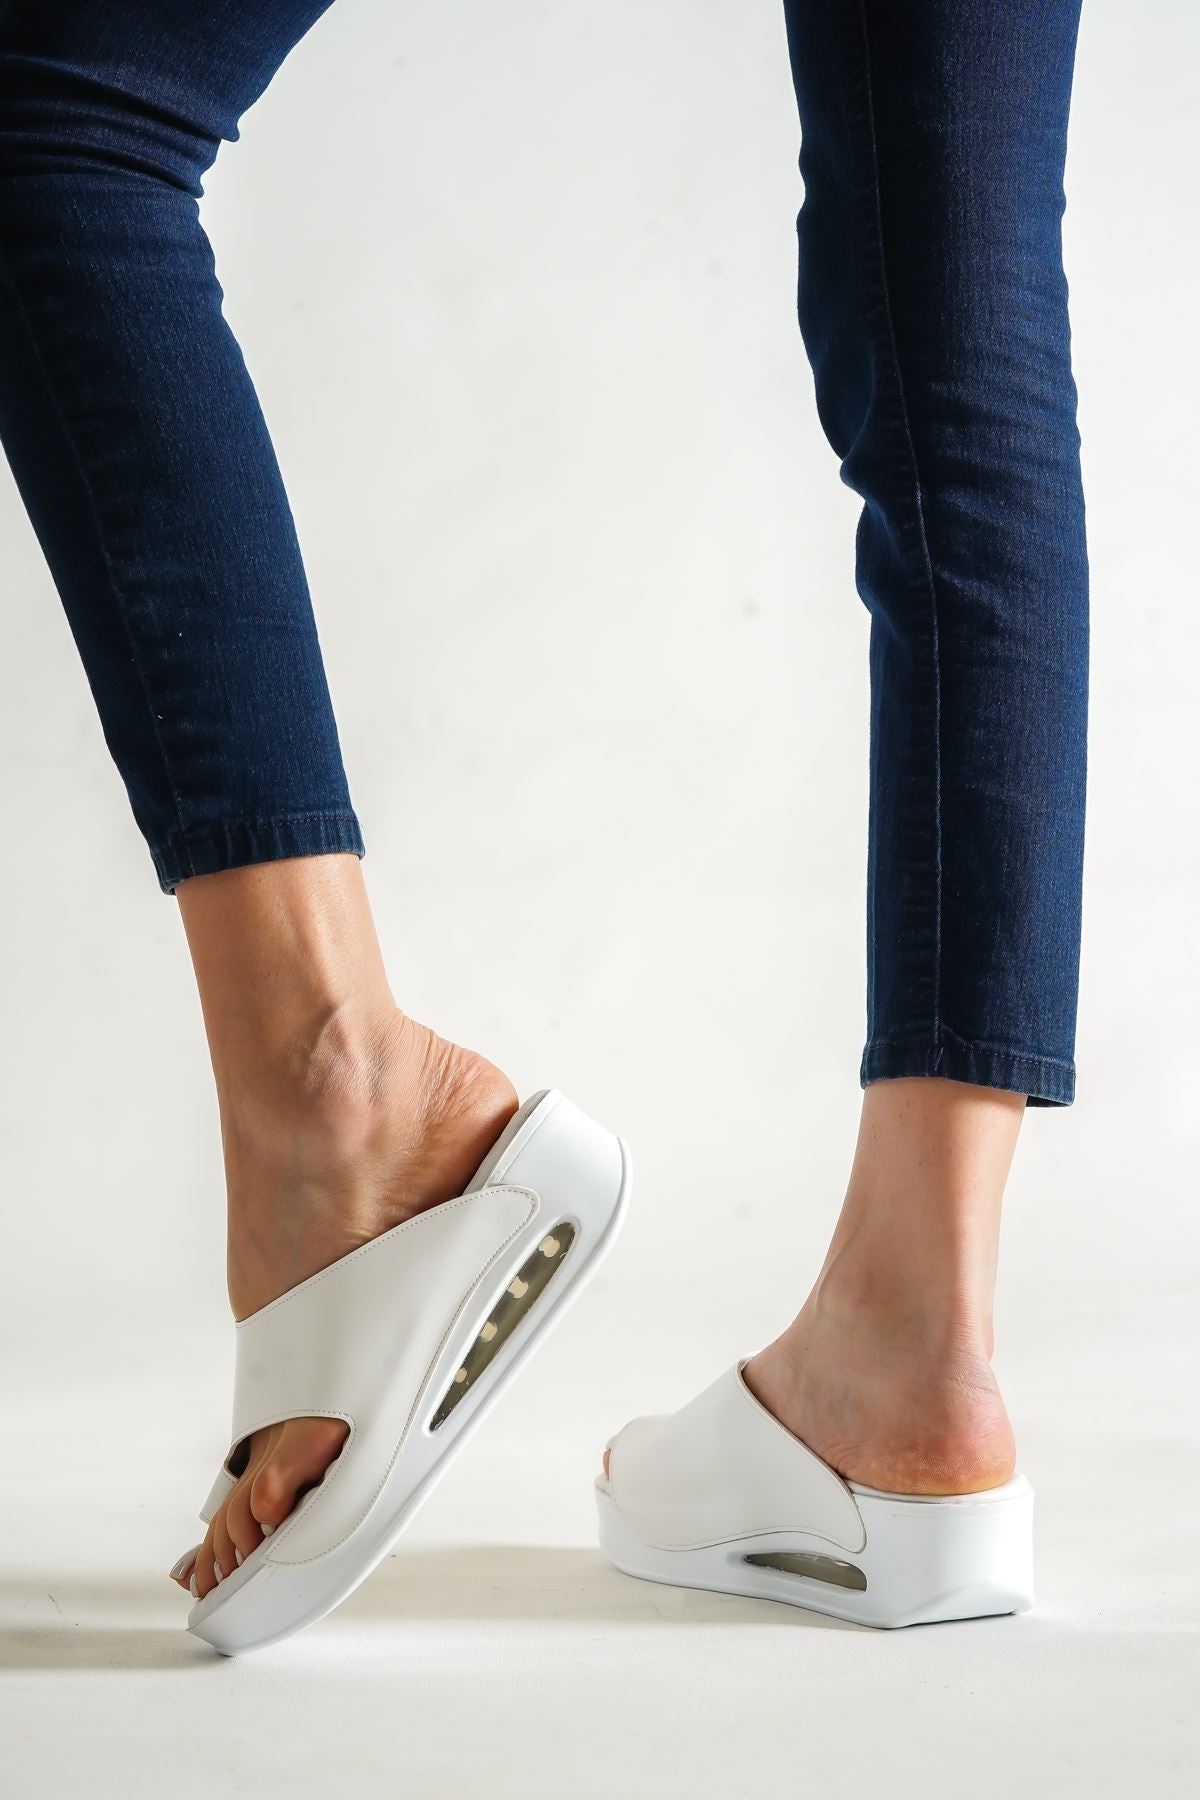 Women's Tools 100% Genuine White Leather Slippers - STREETMODE ™